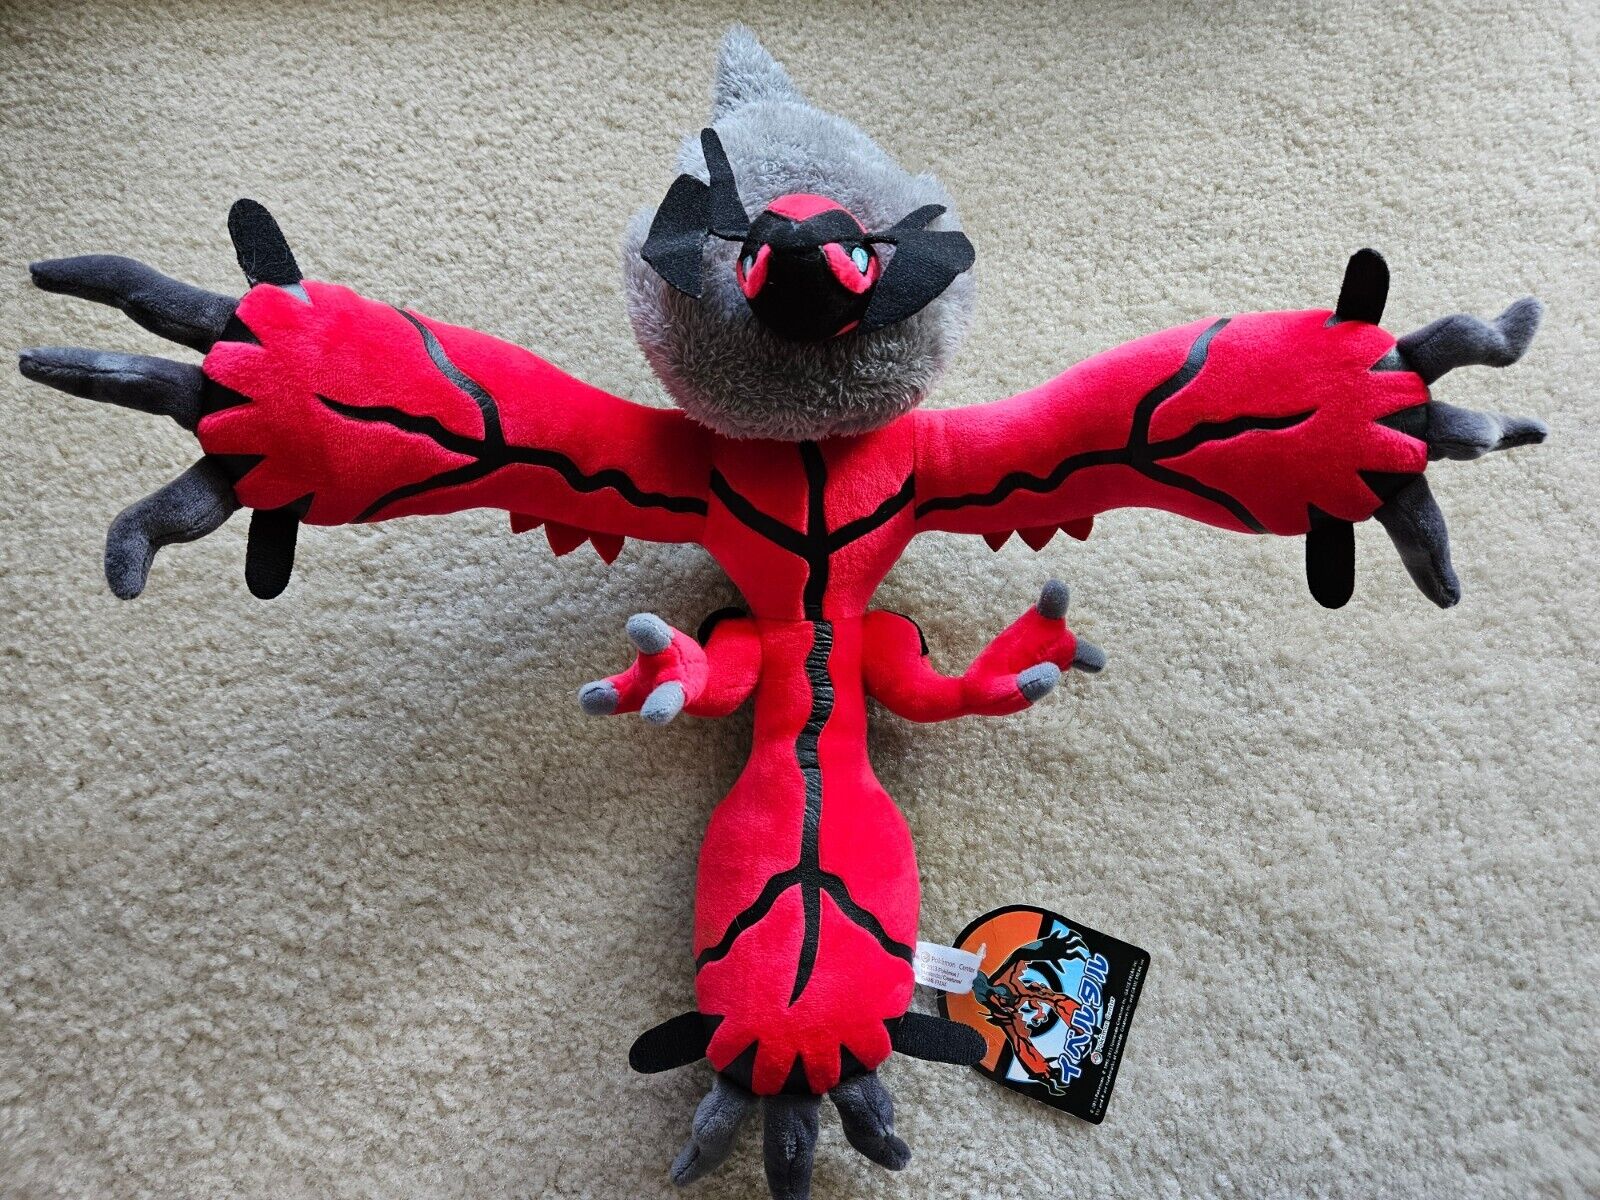 Official 2013 Pokémon Center Yveltal Plush (with Tags)